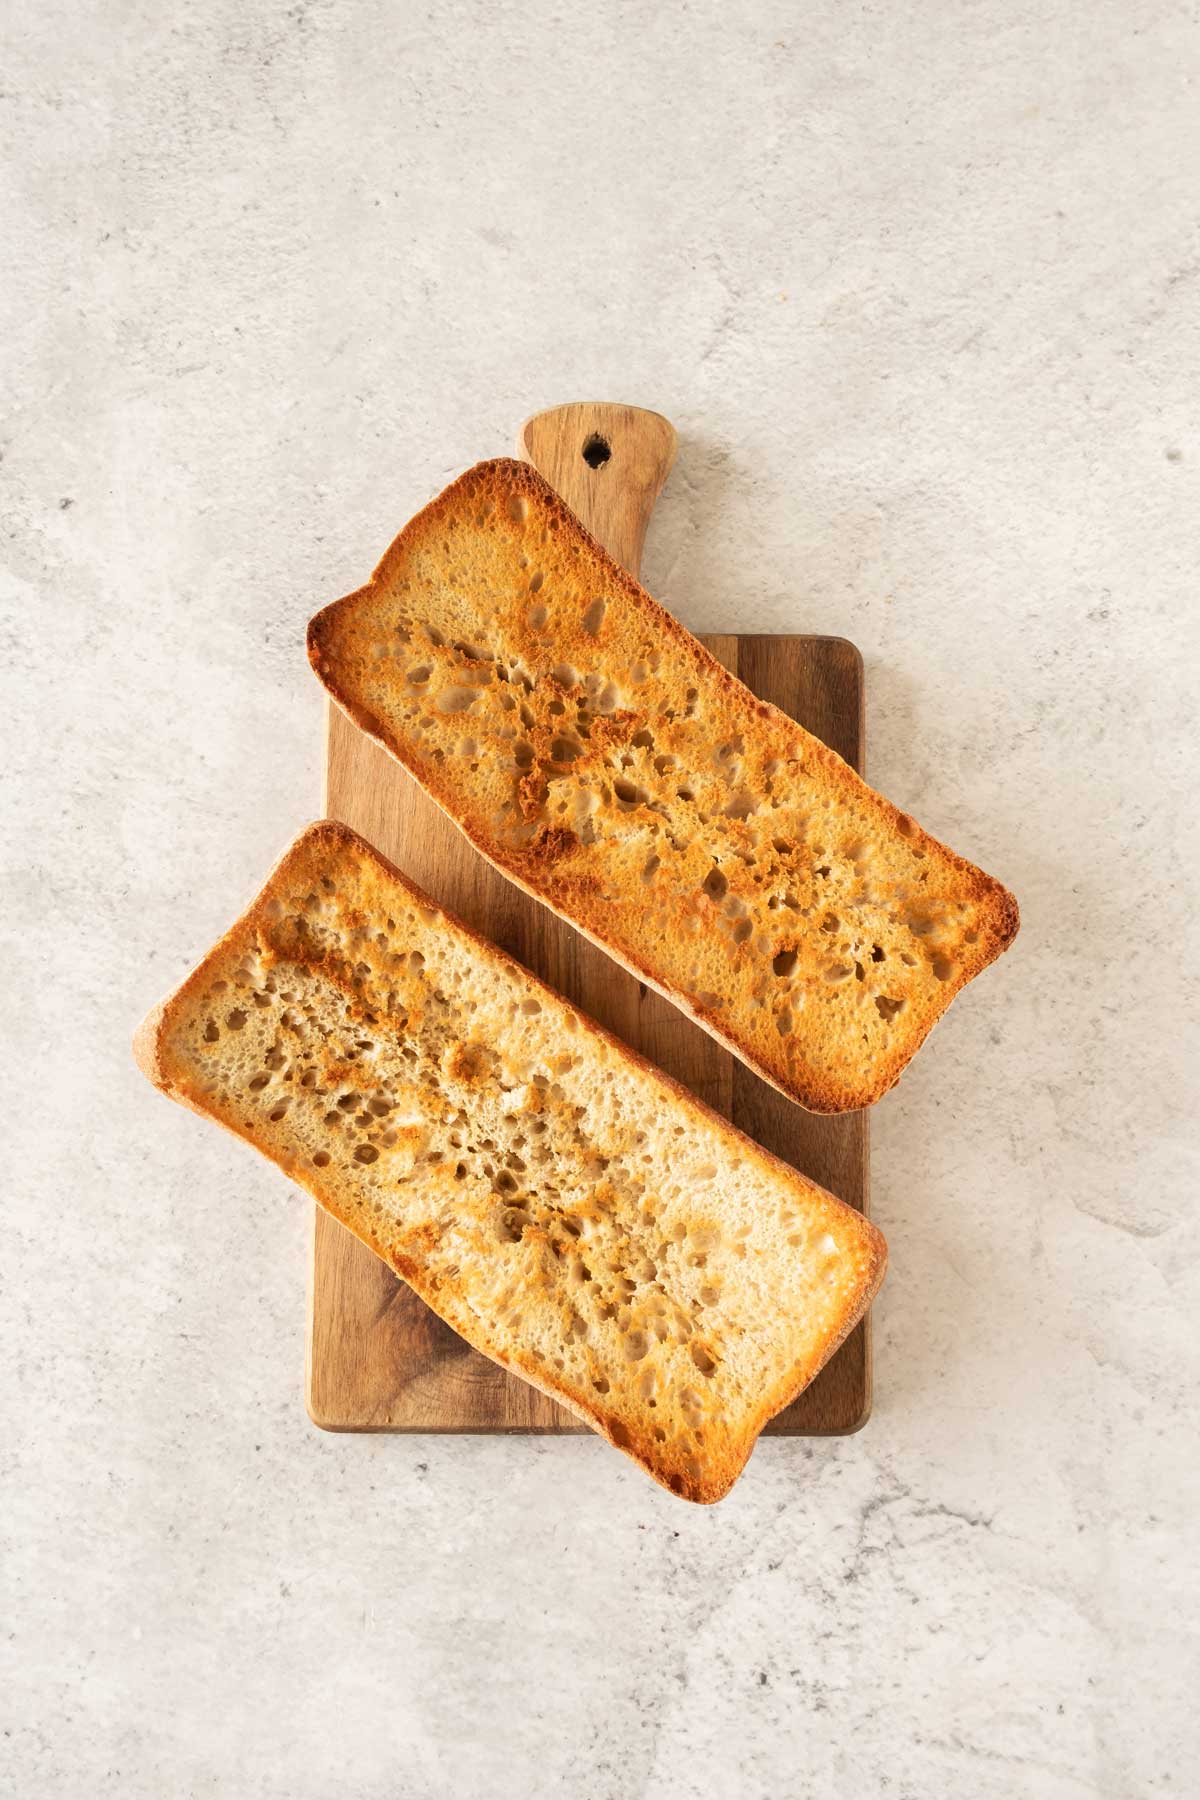 Two slices of toasted bread on a wooden board with a light-colored countertop background.